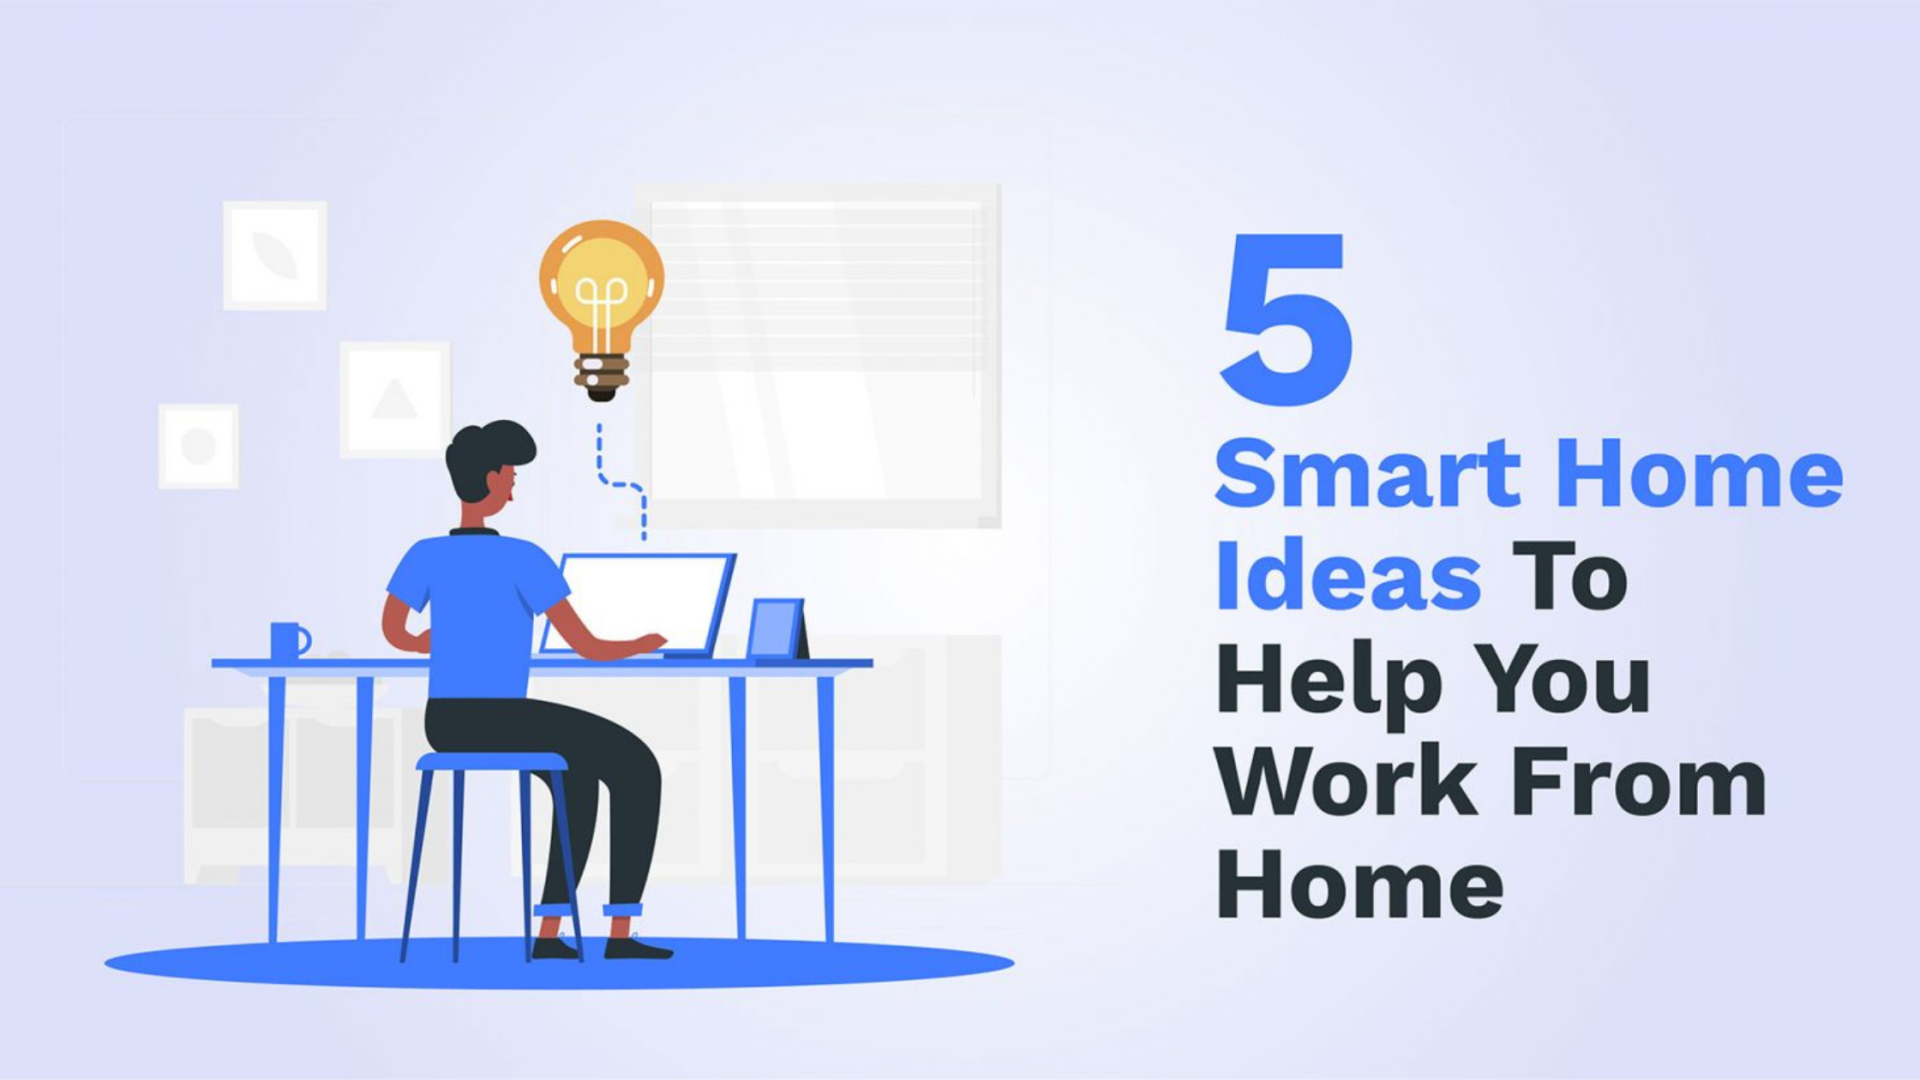 5 Smart Home Ideas to Help You Work from Home